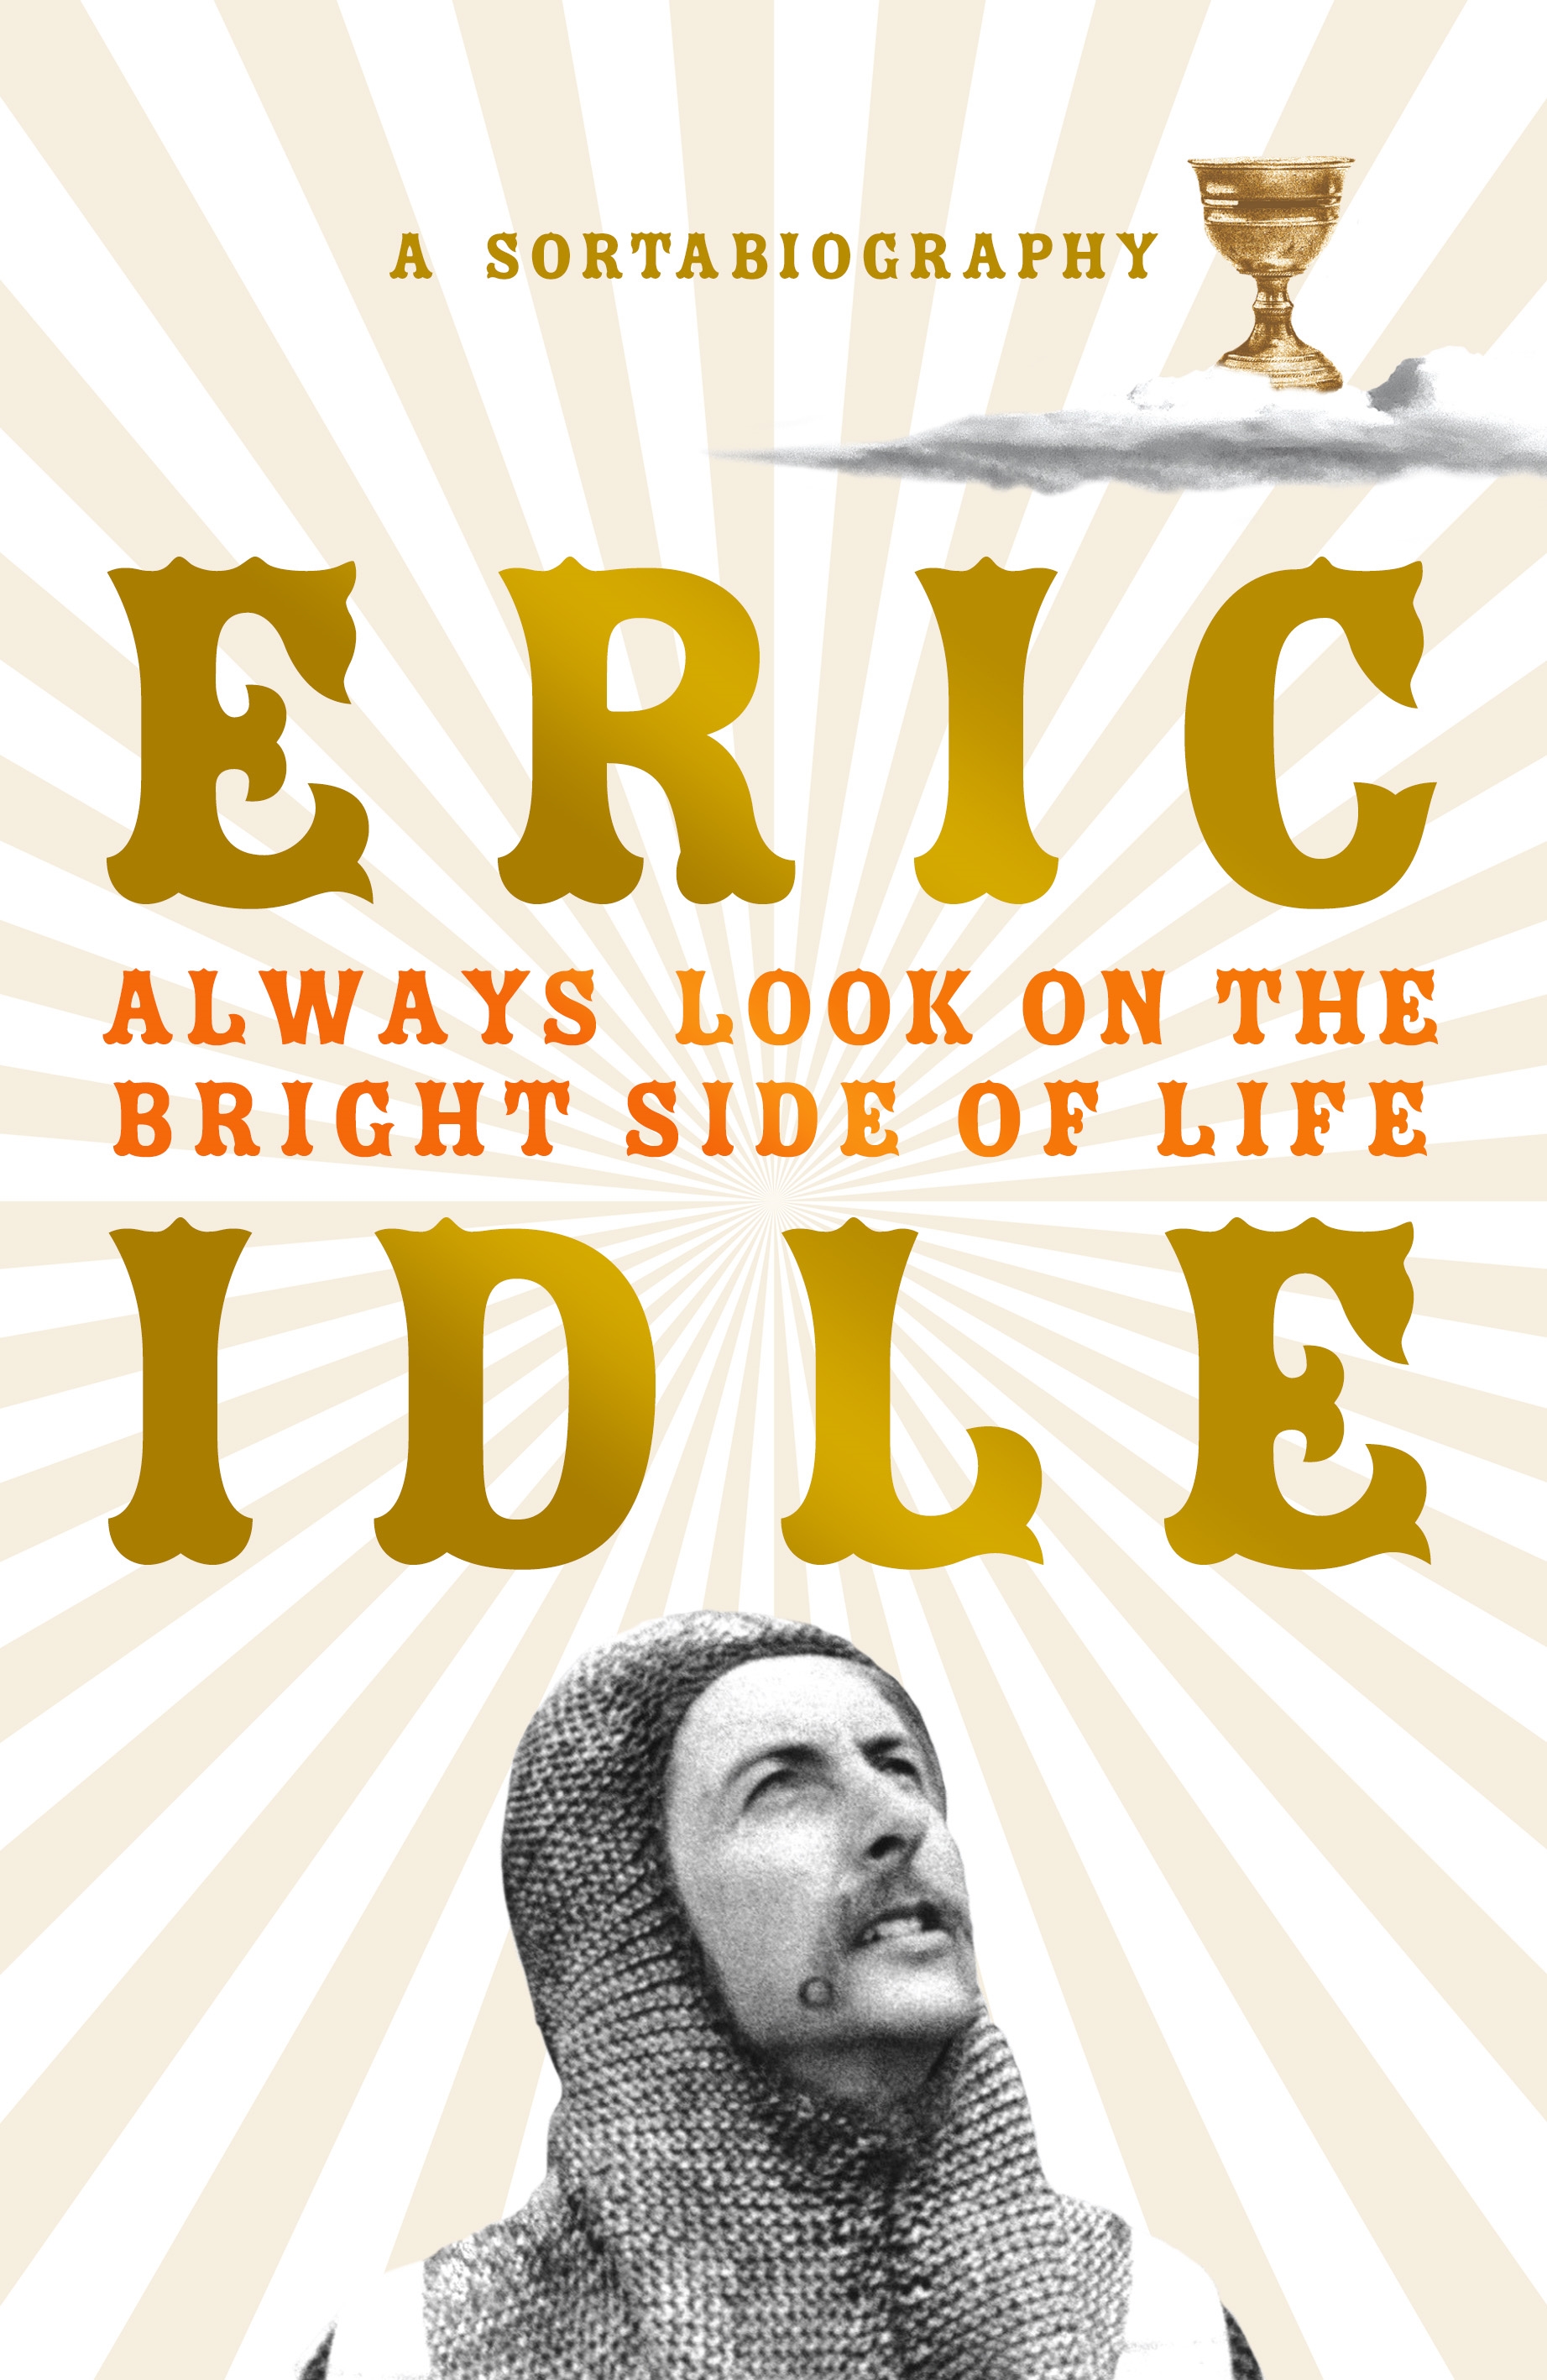 always look on the bright side of life by eric idle